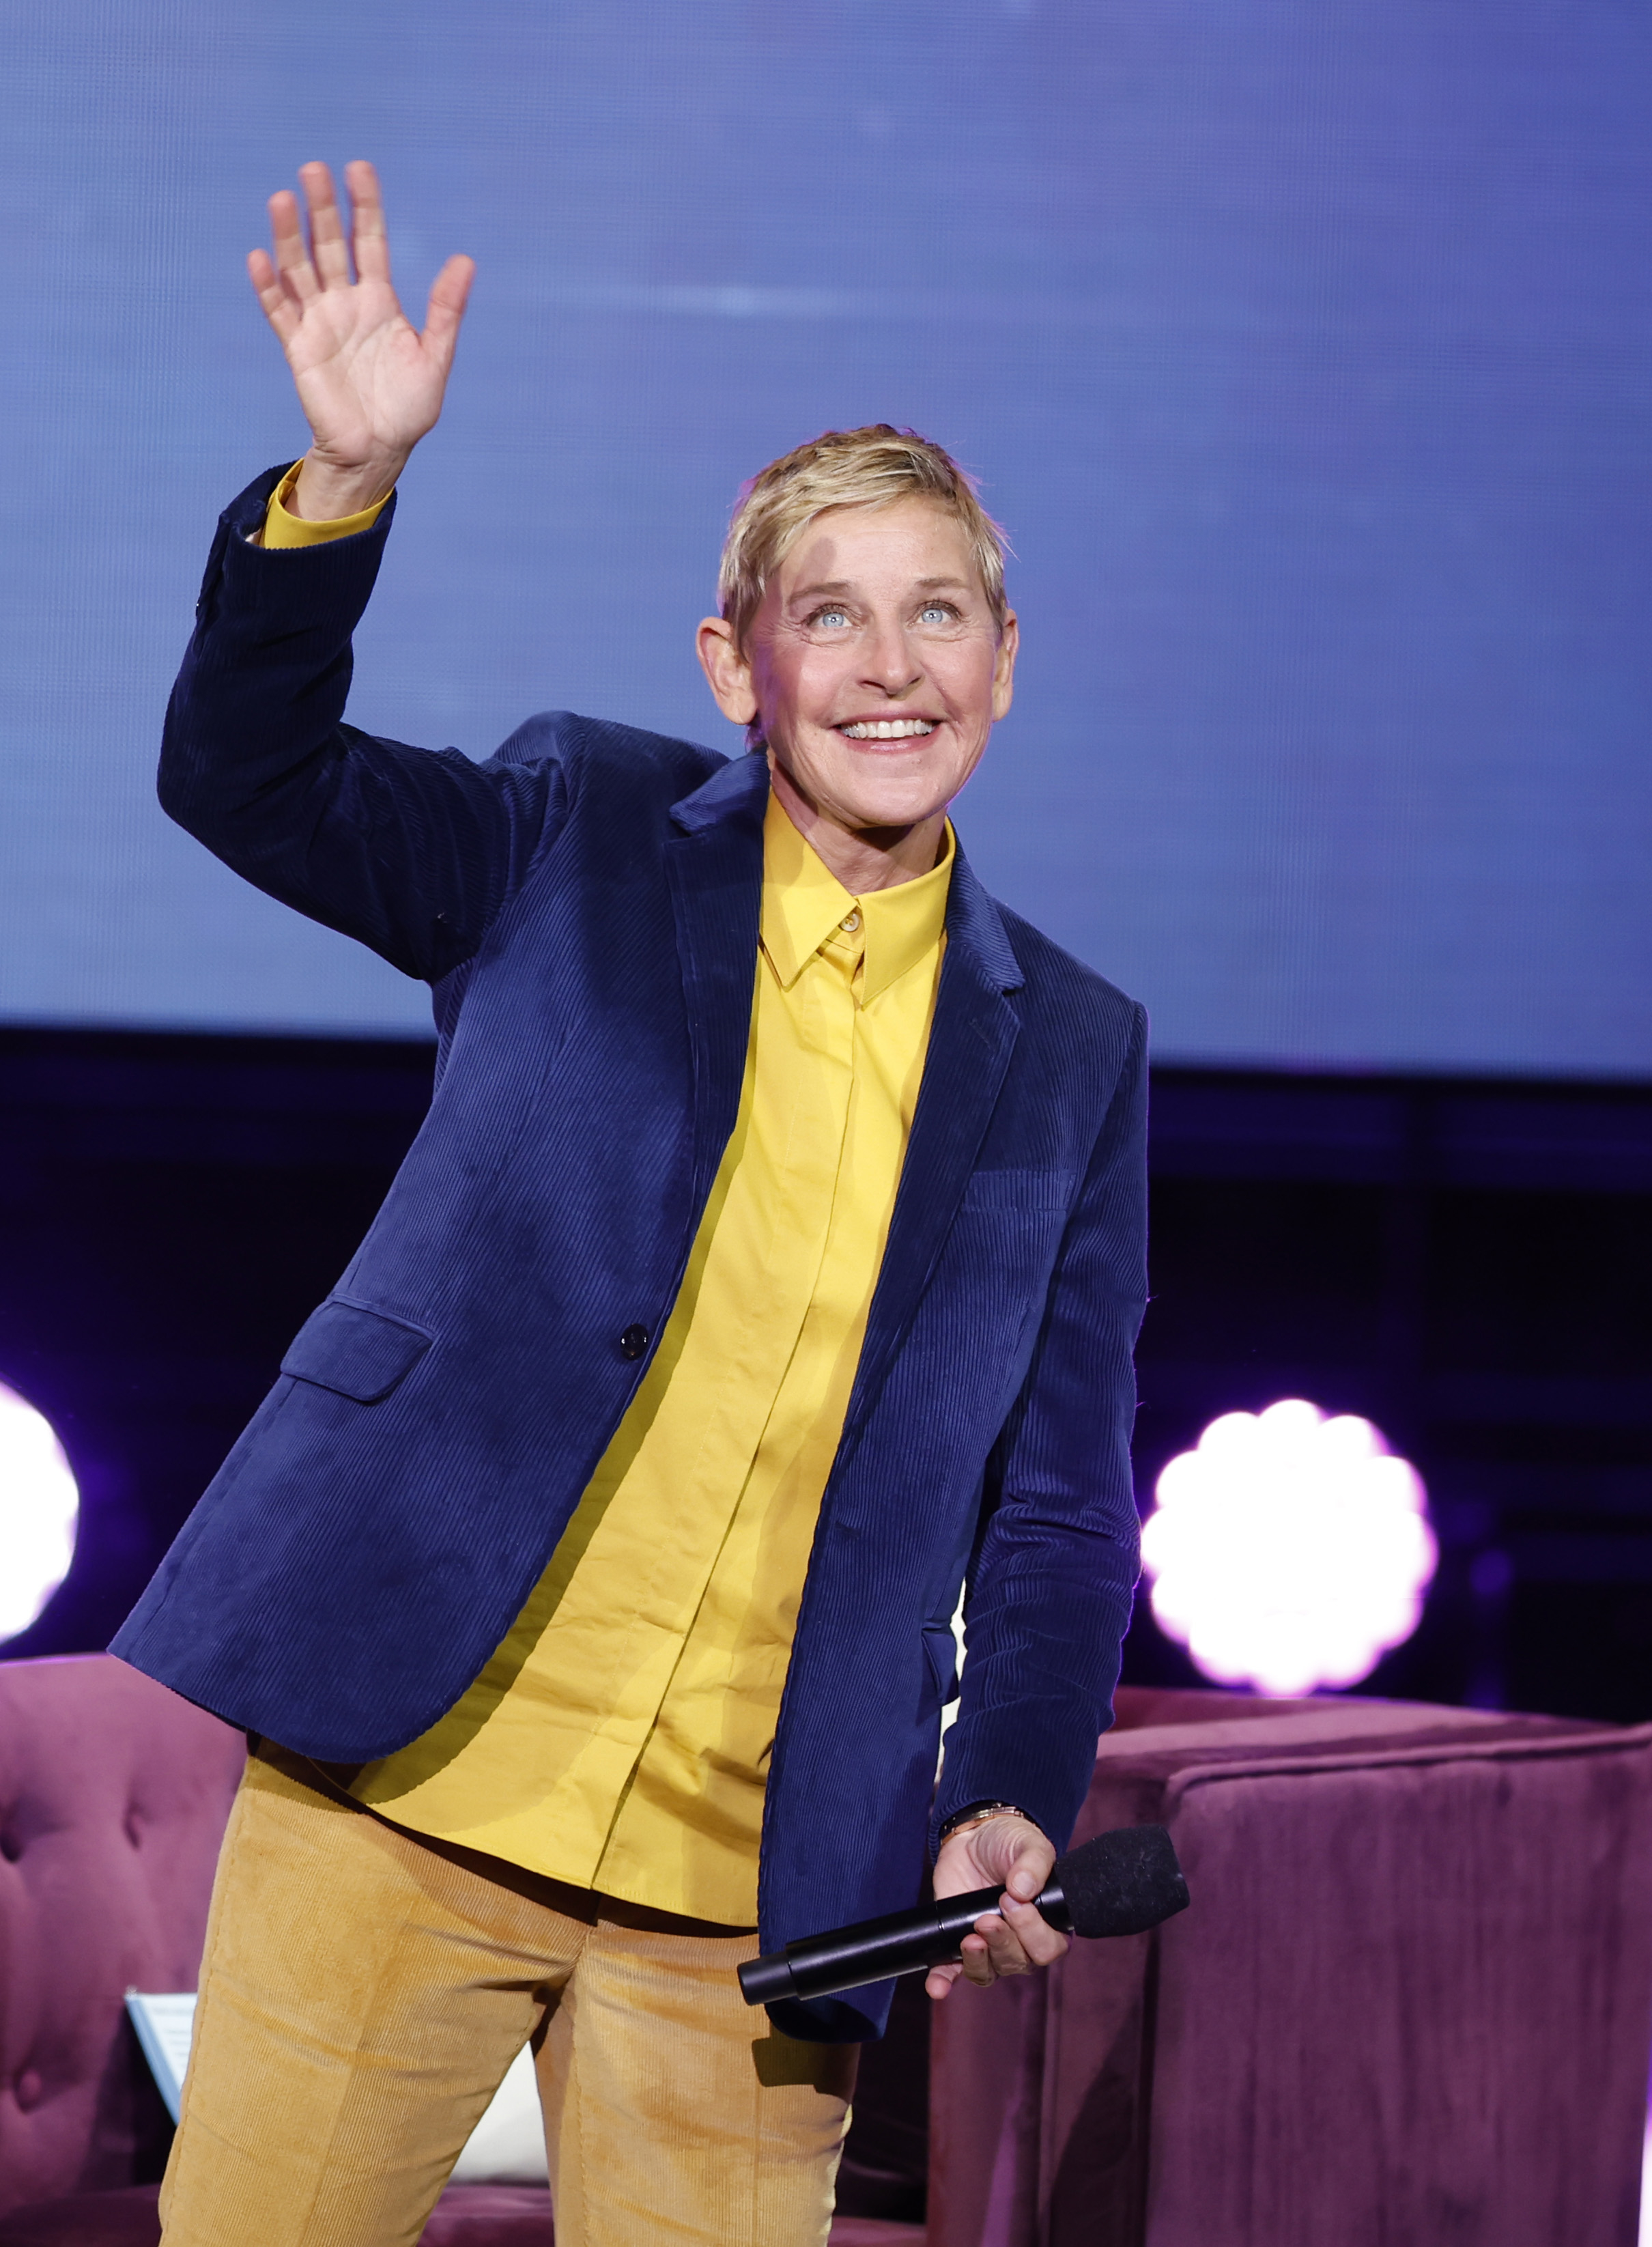 Ellen DeGeneres on stage in a blazer and trousers waving, with a mic in hand